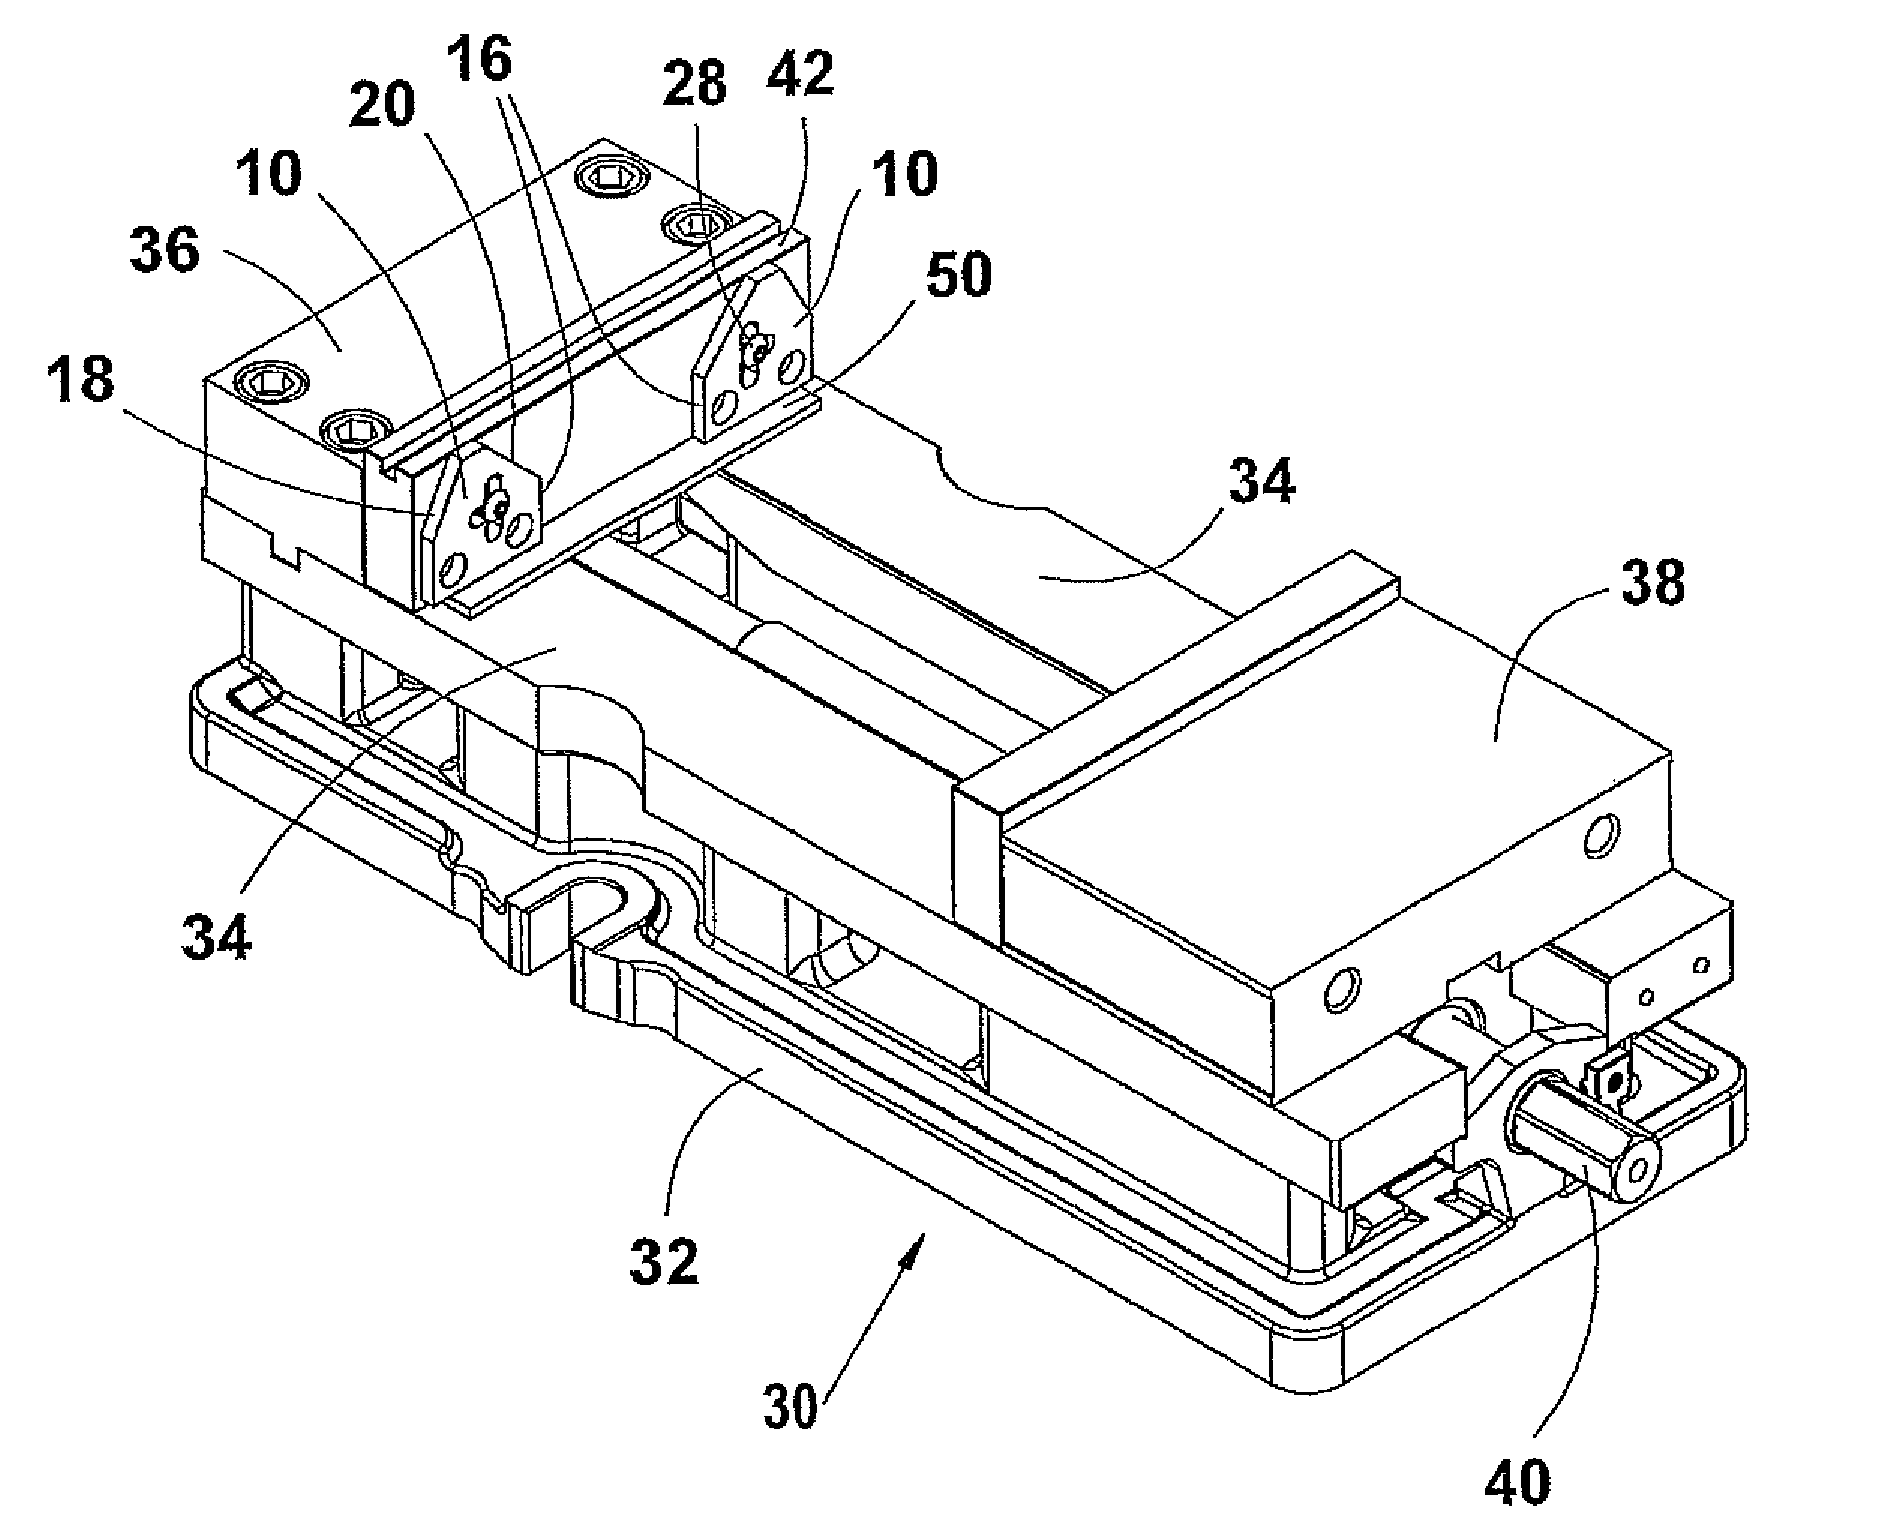 Machine vise parallel with angled edges